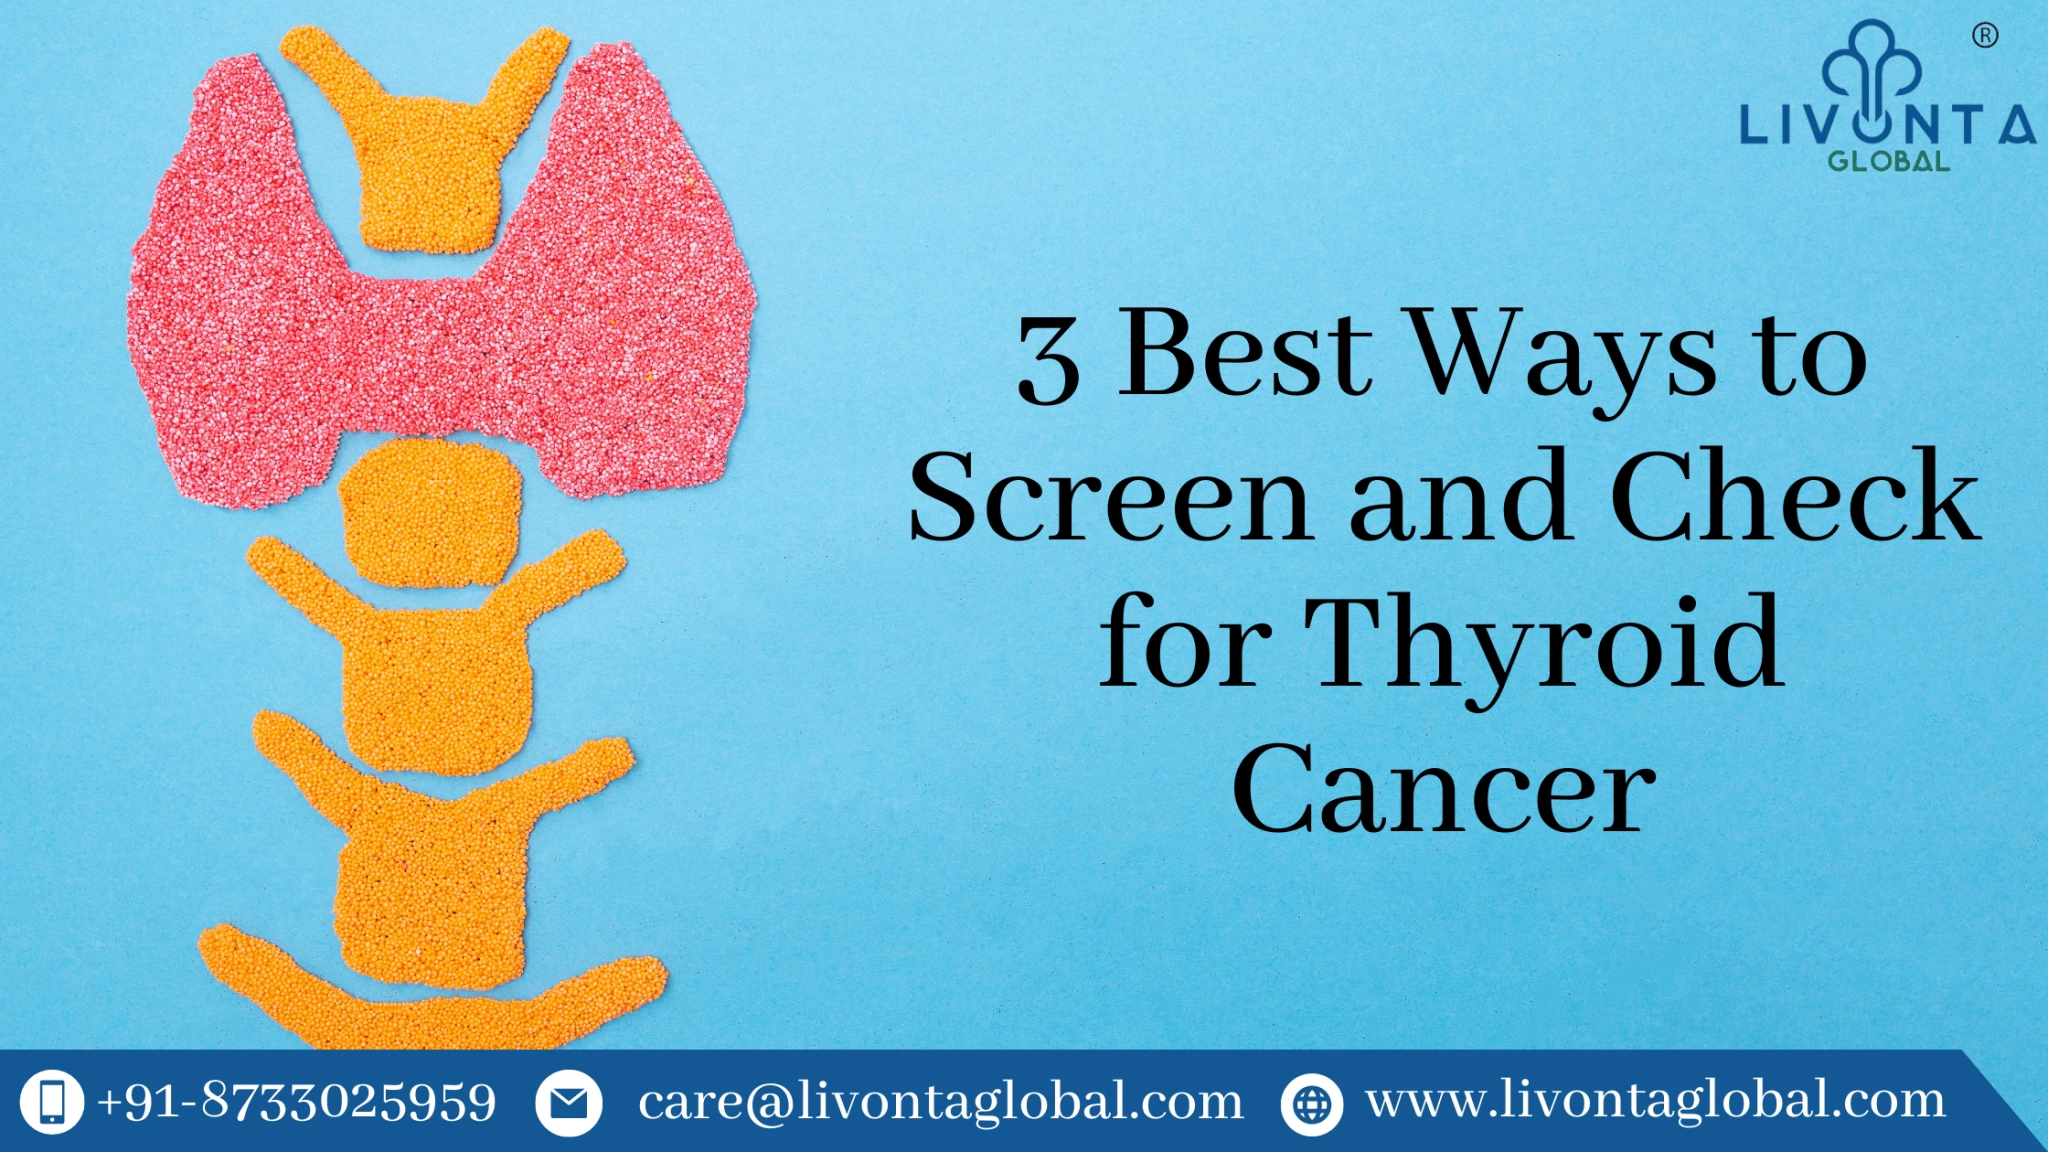 3 Best Ways to Screen and Check for Thyroid Cancer